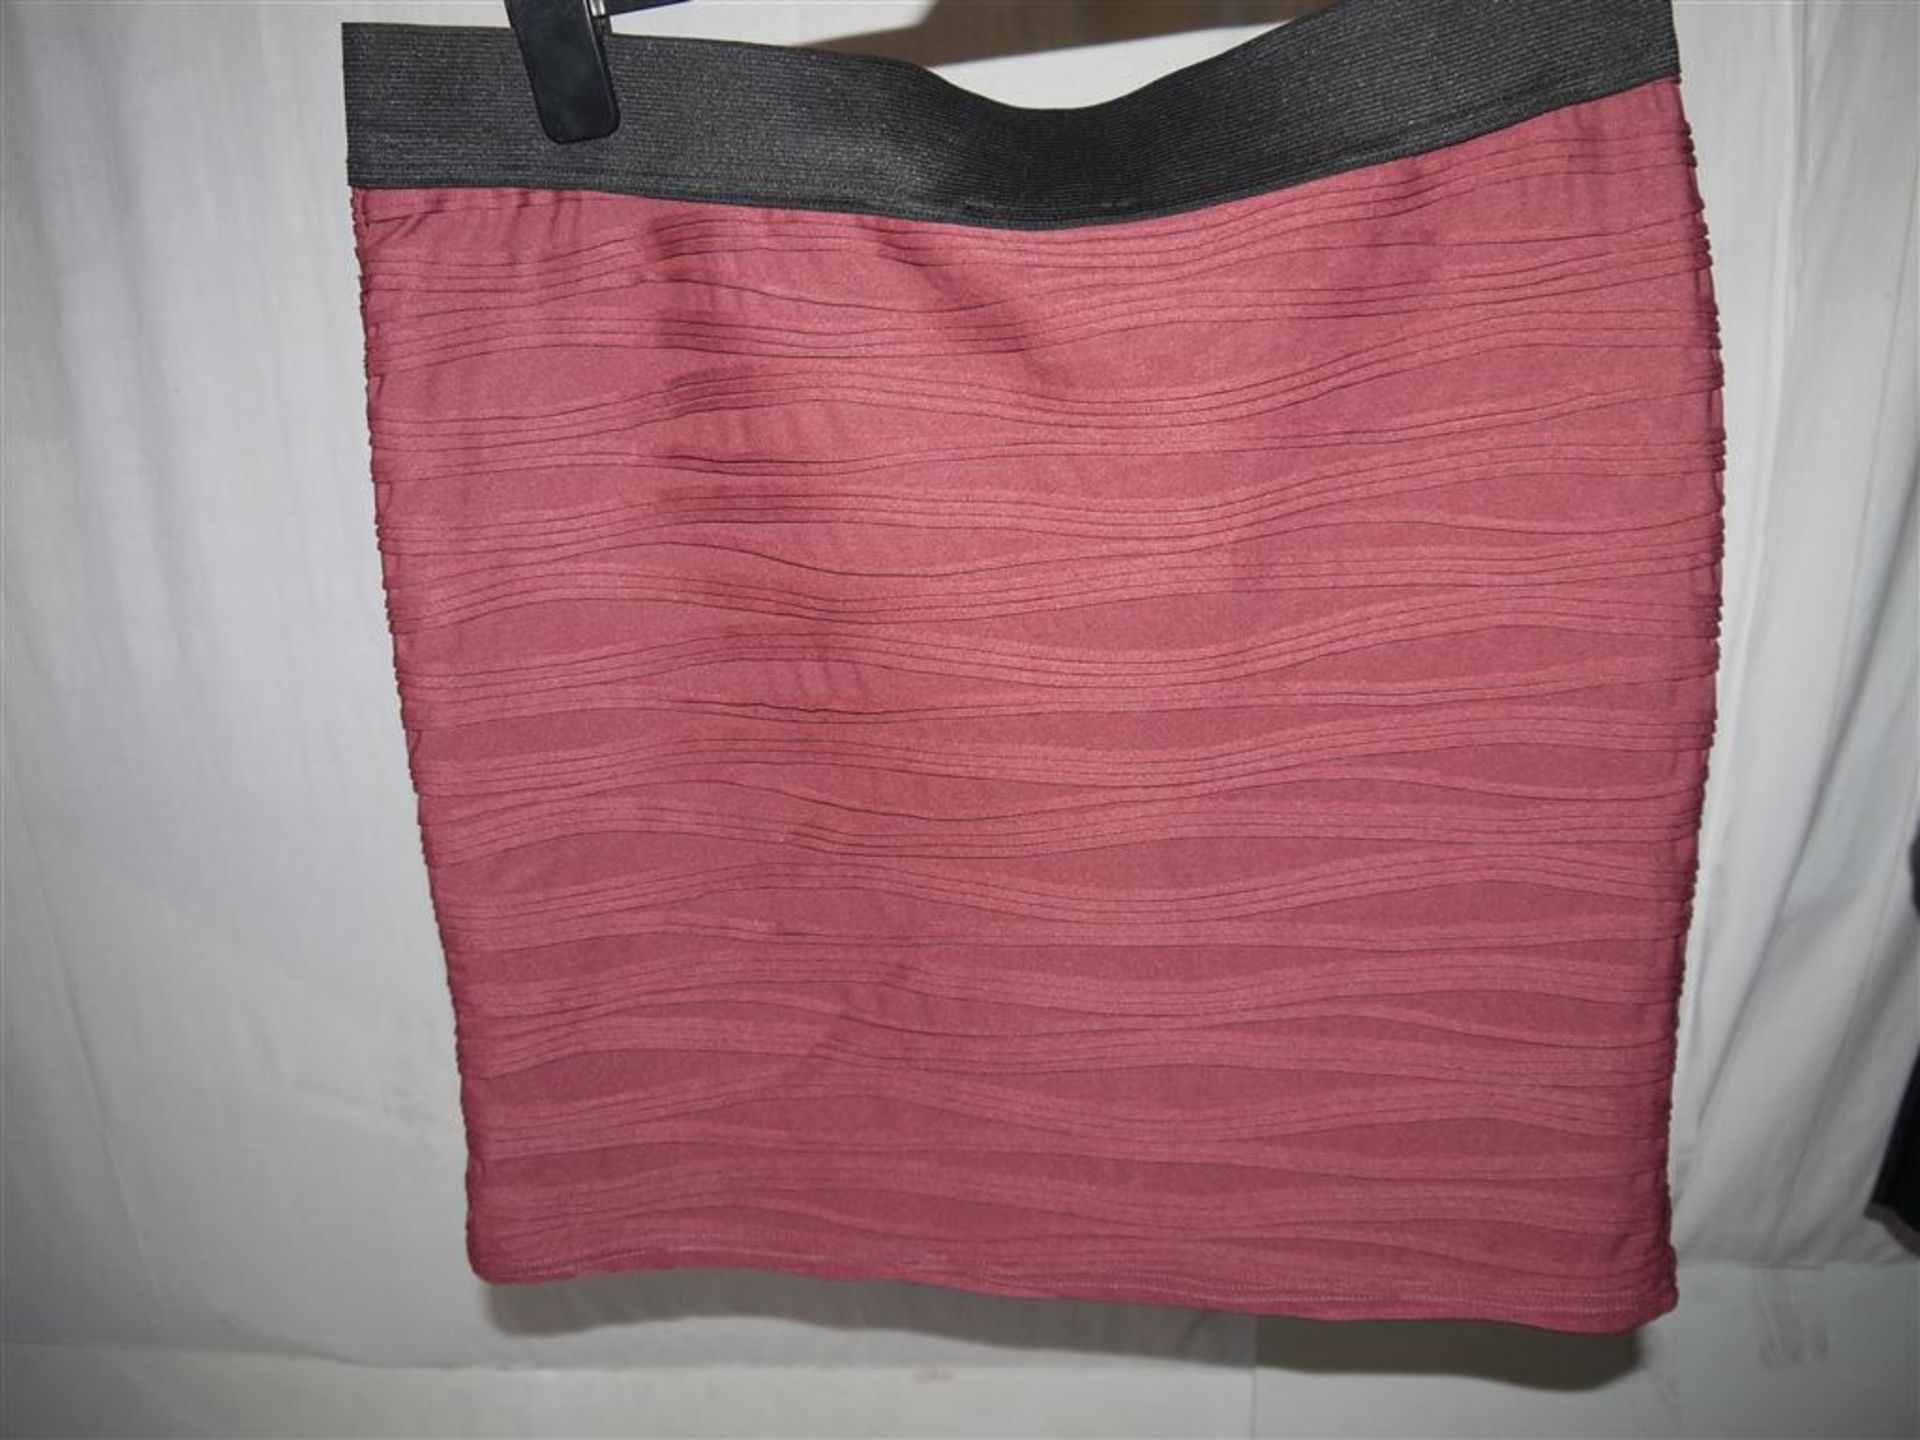 82 x Items Of Assorted Women's Clothing - Box407 - Shorts, Skirts, Pants, Tops & Swimwear - Sizes - Image 8 of 21